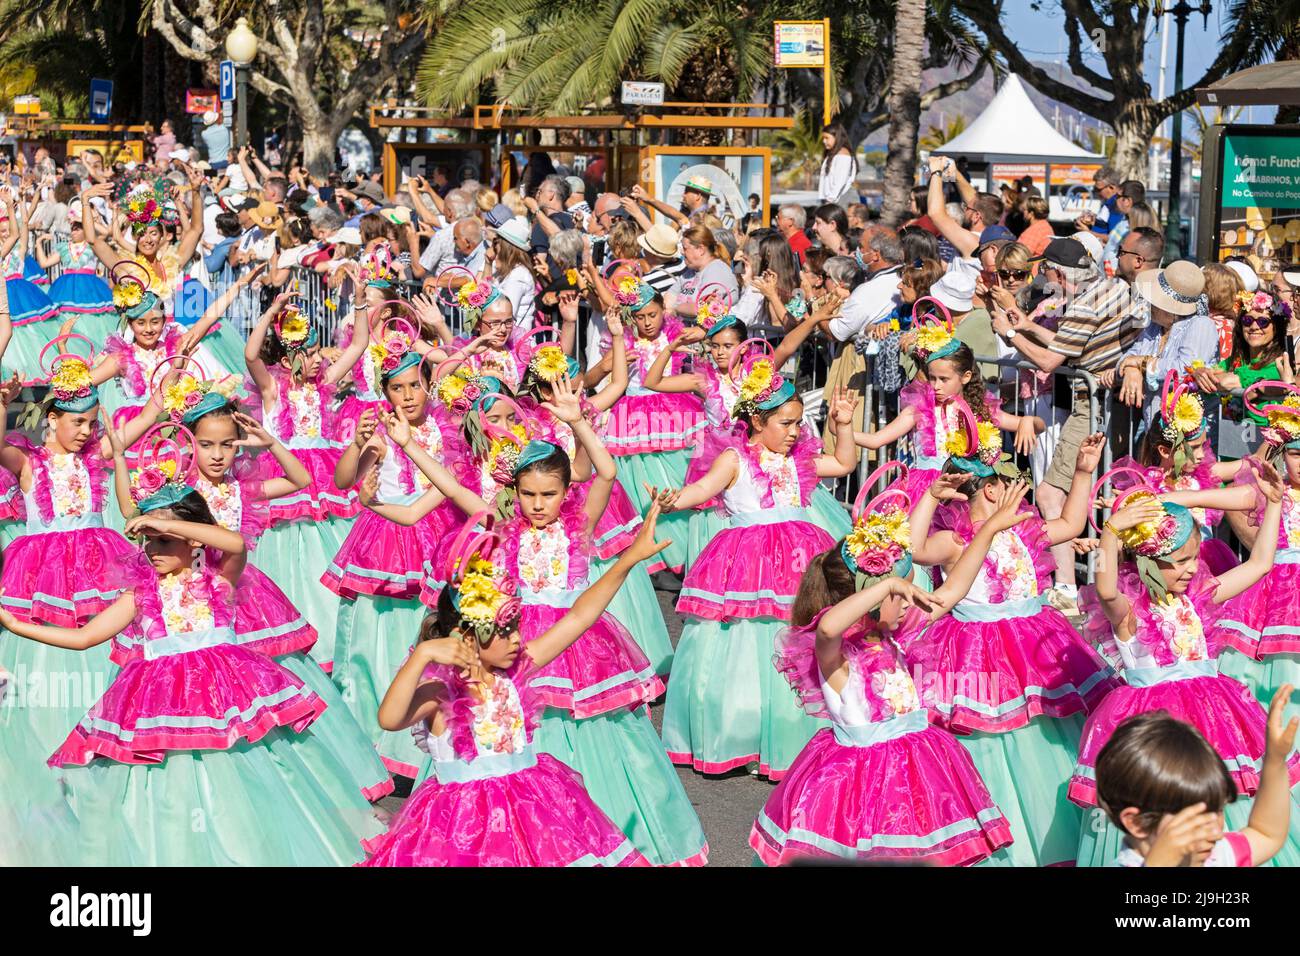 Funchal, Madeira - May 8, 2022: The famous Flower Festival (Festa da flor) in Madeira. Children dancing in the flower parade in Funchal. Stock Photo